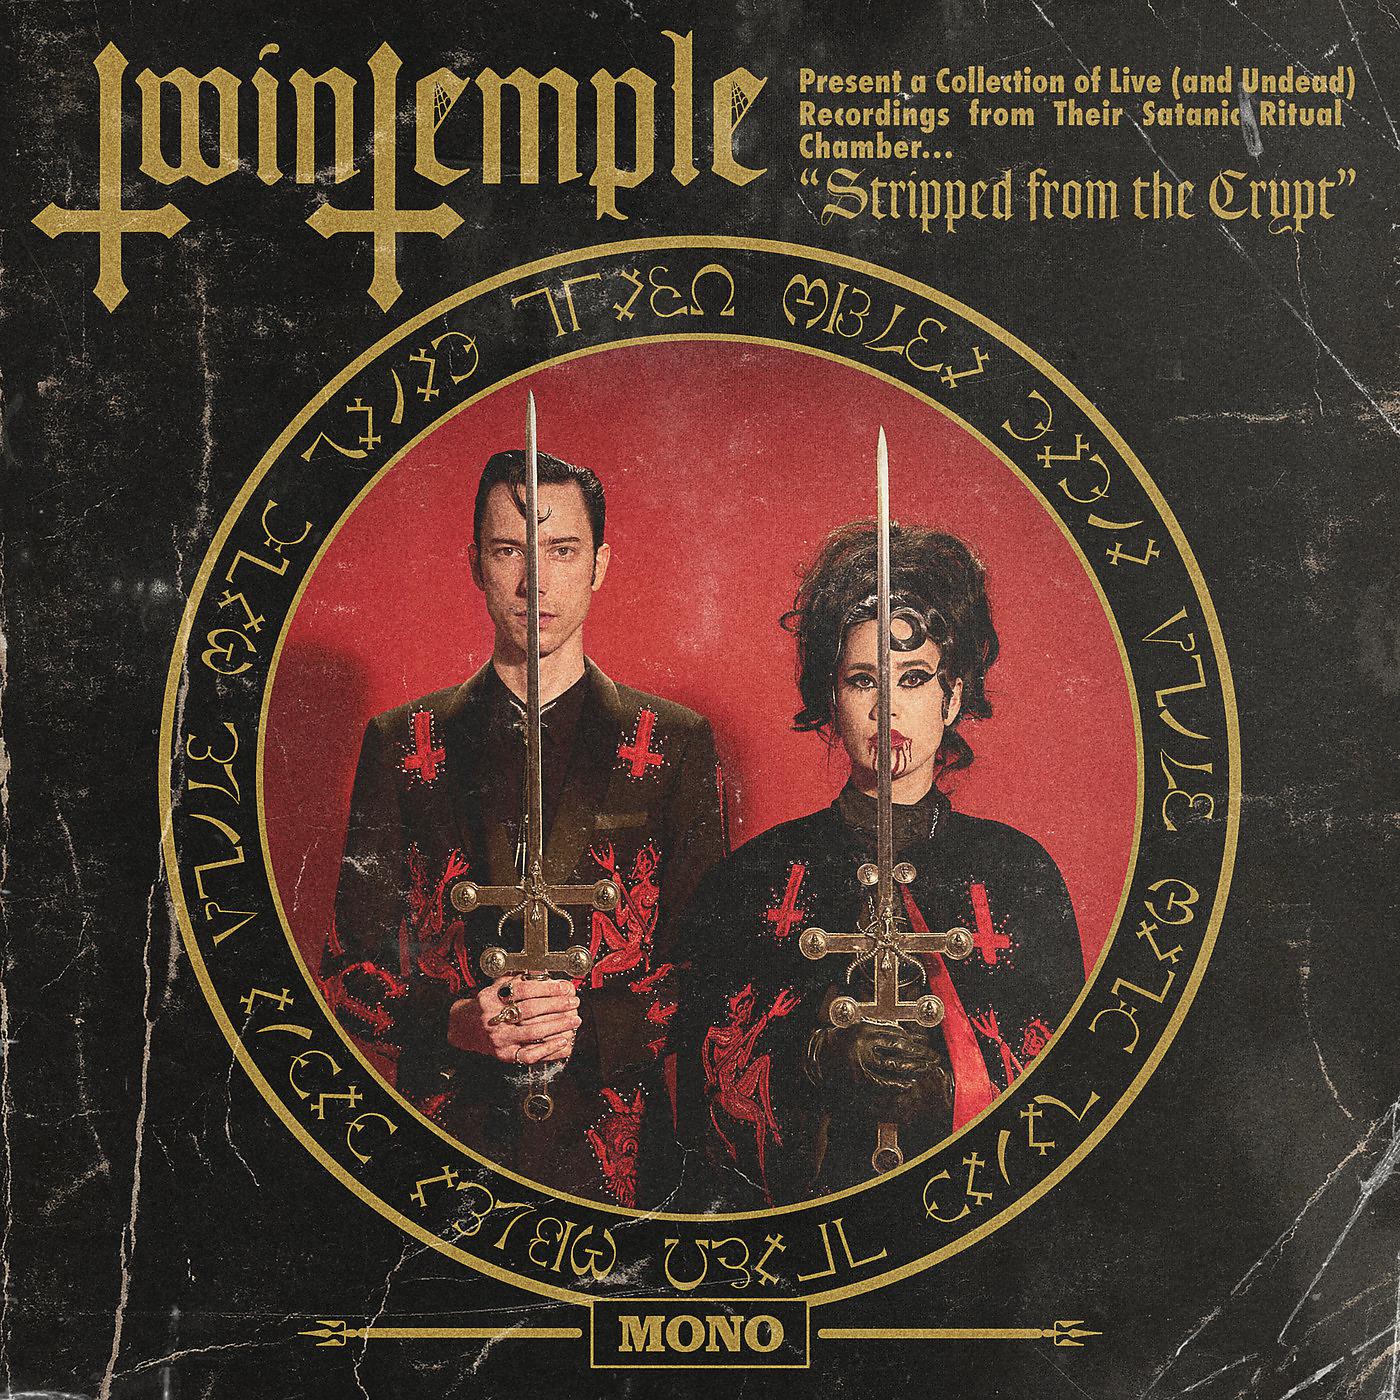 Постер альбома Twin Temple Present a Collection of Live (And Undead) Recordings from Their Satanic Ritual Chamber… Stripped from the Crypt